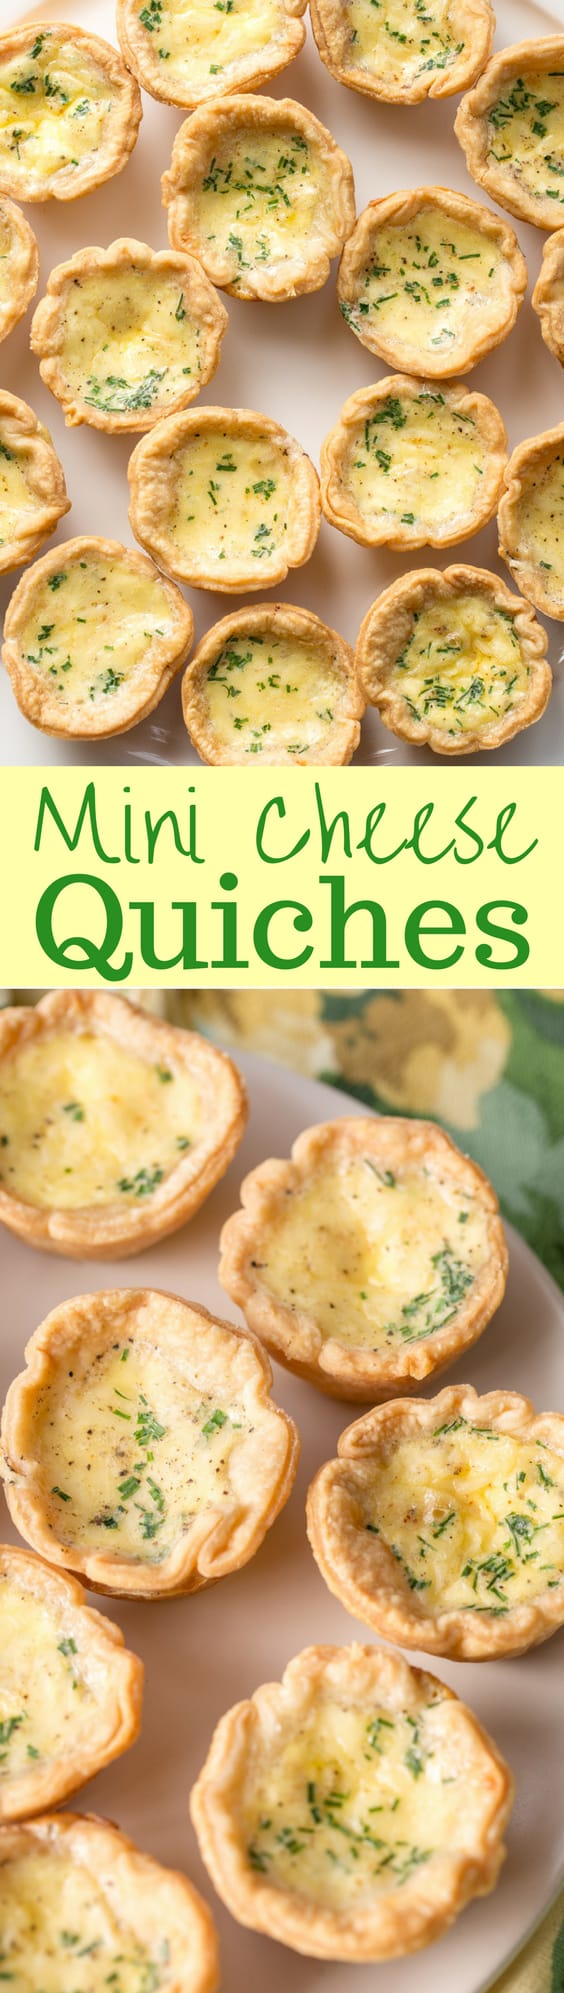 Mini Cheese Quiche Recipe - with a velvety smooth filling, rich flavor and a flaky crust - the perfect appetizer! www.savingdessert.com